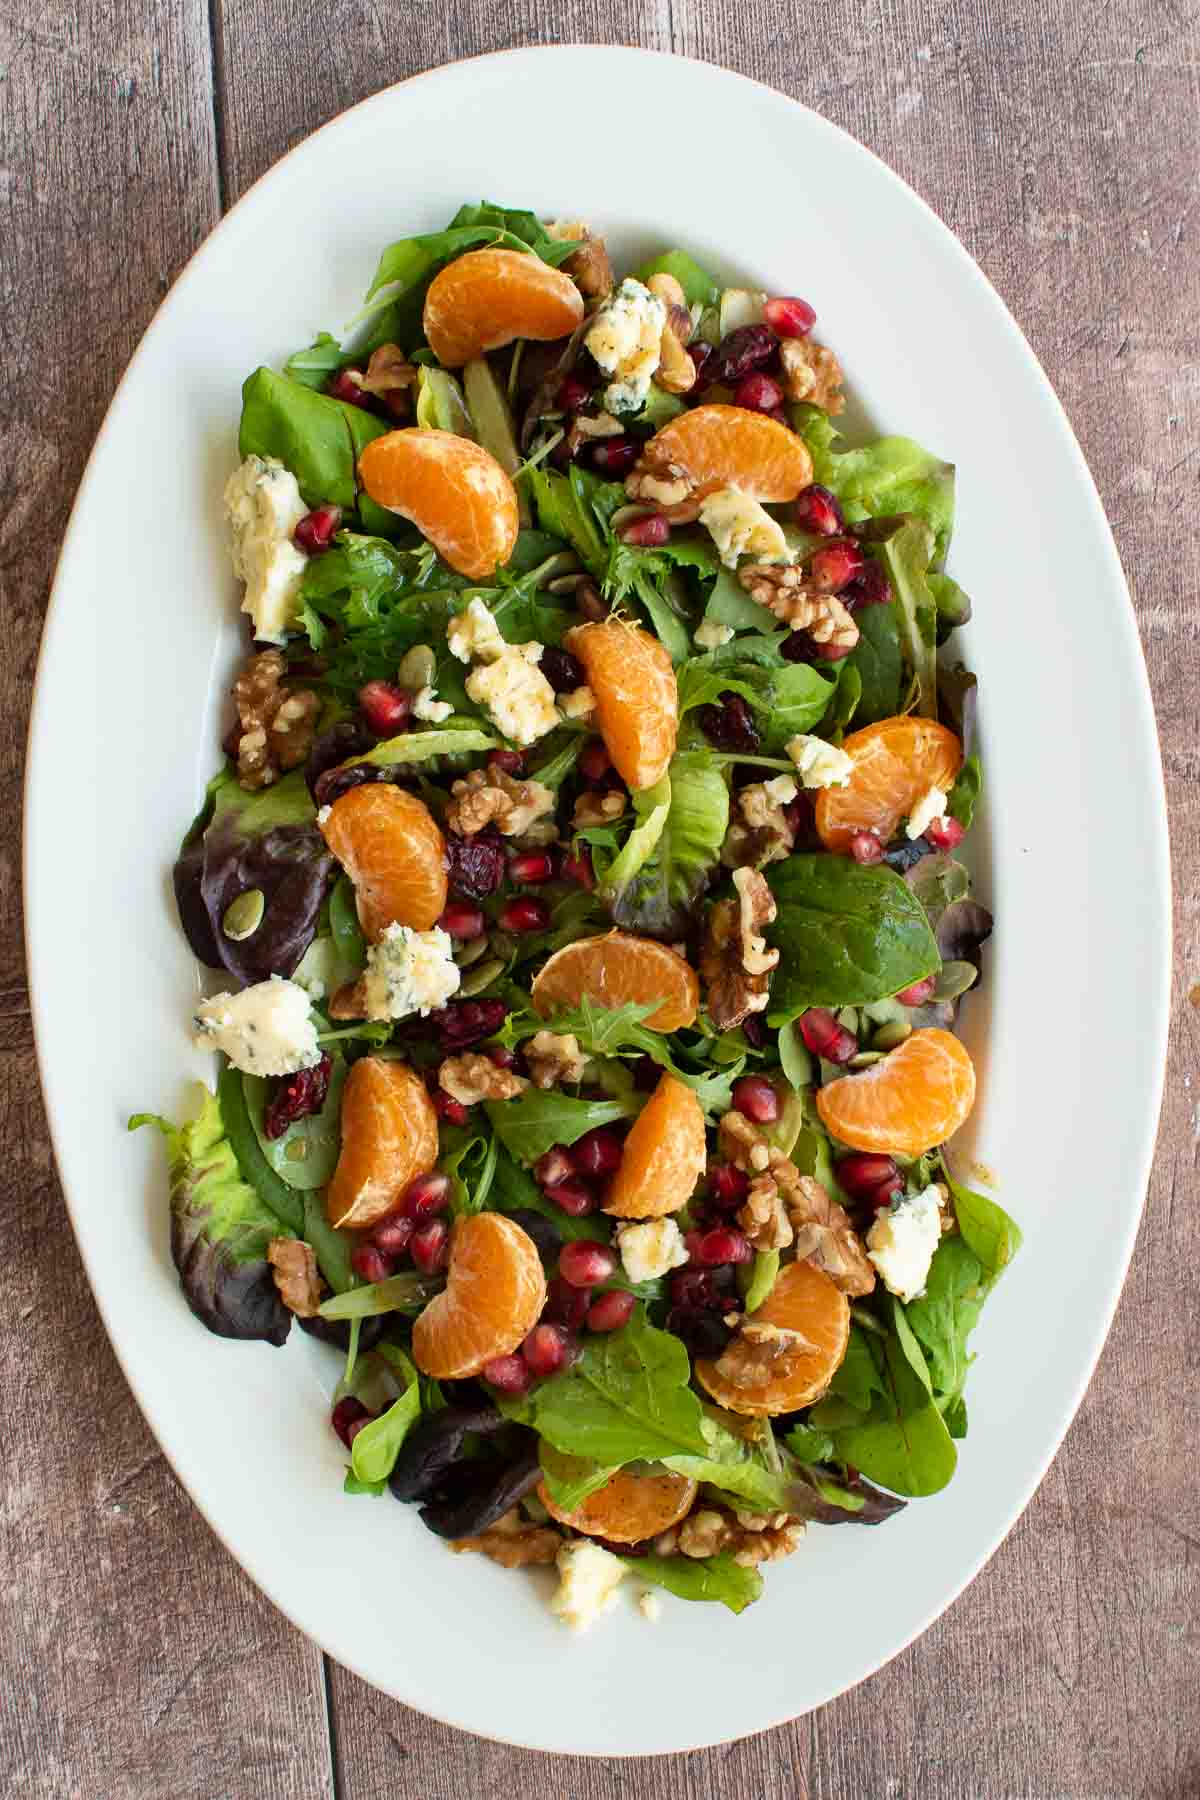 Holiday side salad with blue cheese, oranges and cranberries.